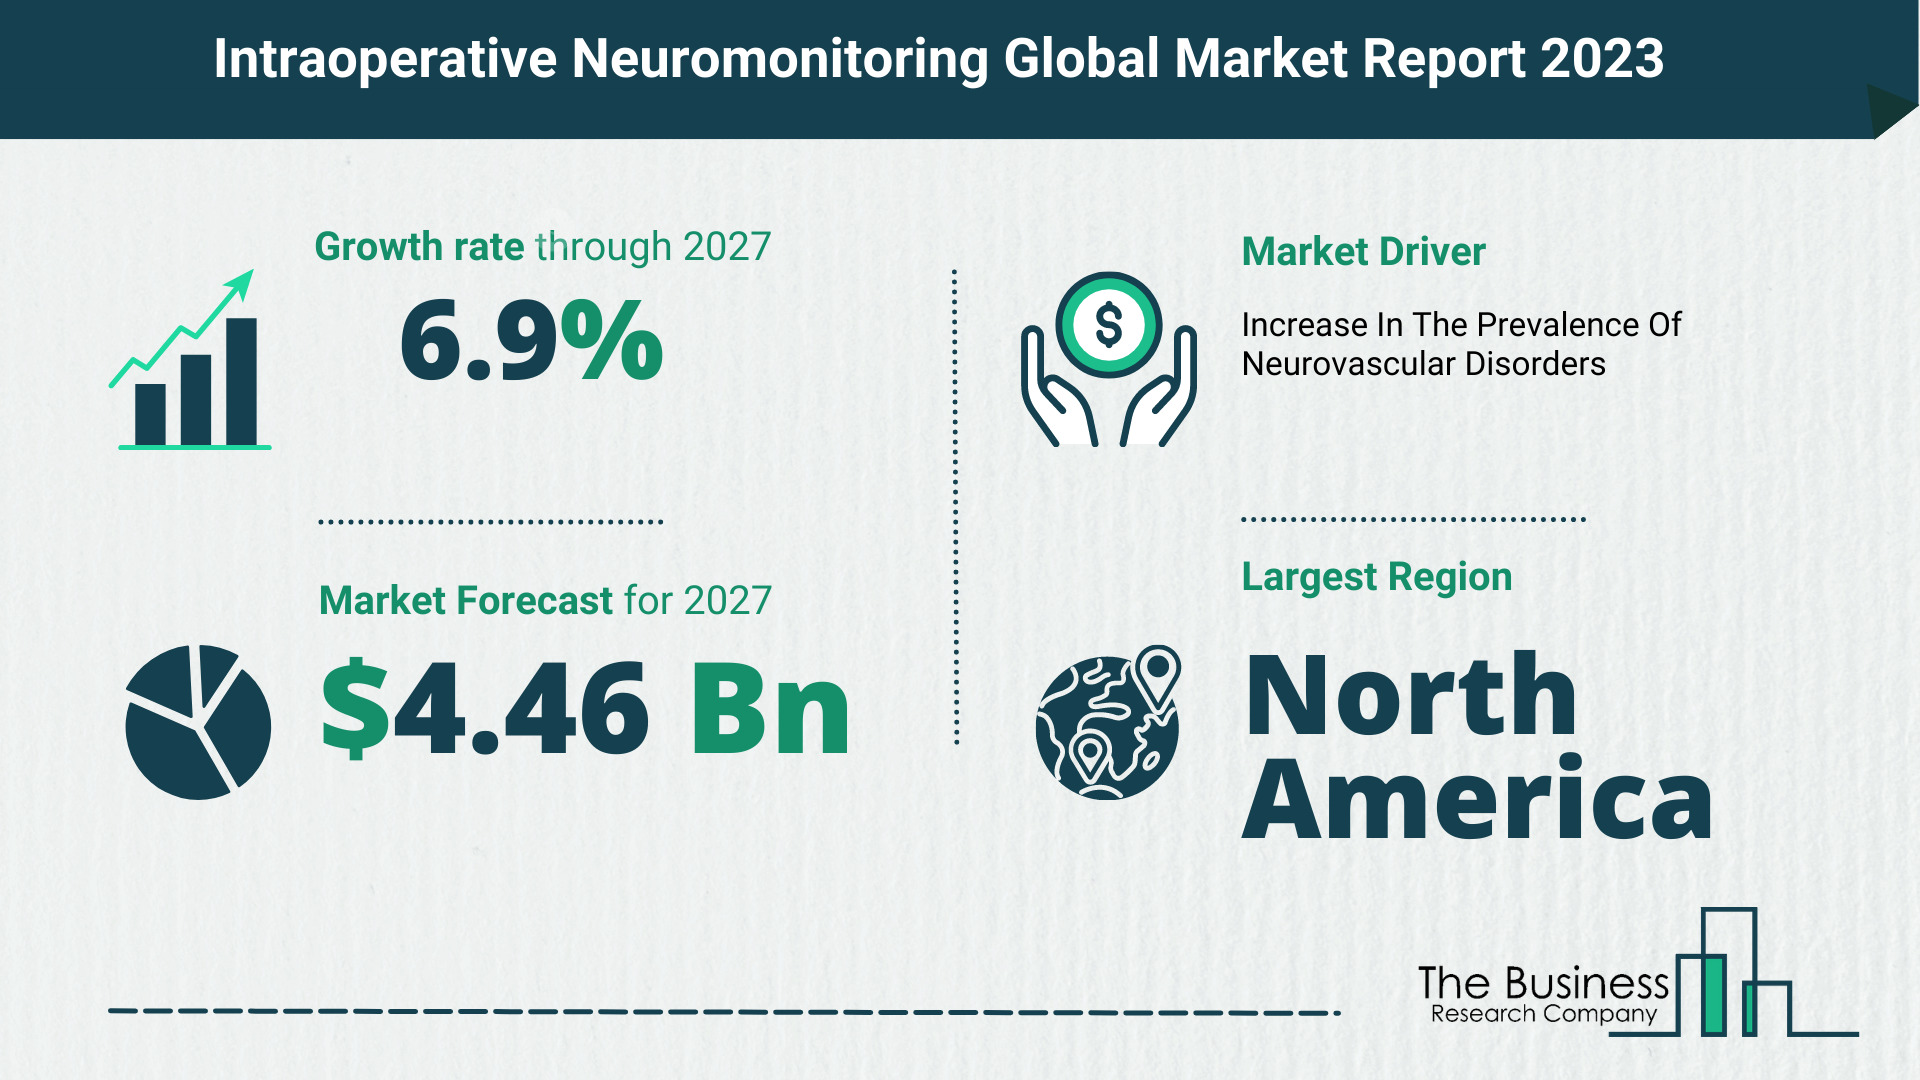 How Will The Intraoperative Neuromonitoring Market Globally Expand In 2023?